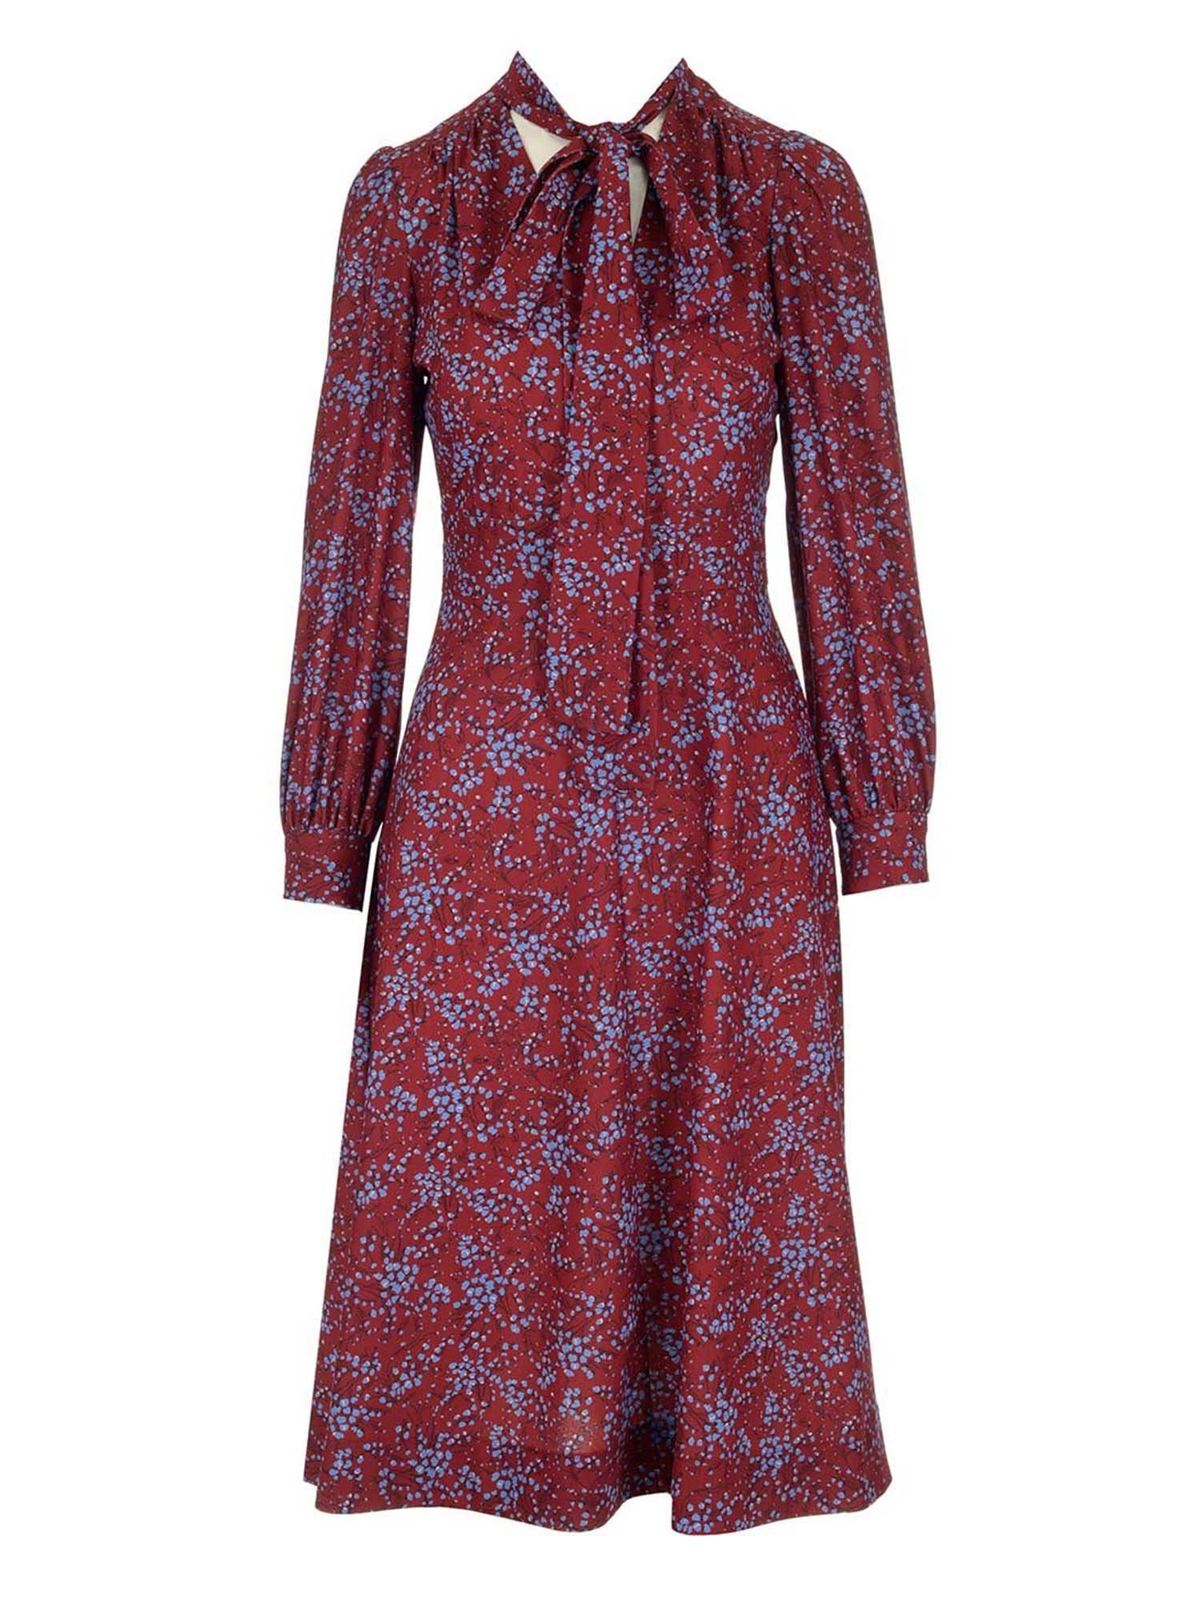 SEE BY CHLOÉ SCARF-NECK MIDI DRESS IN BLUE AND RED